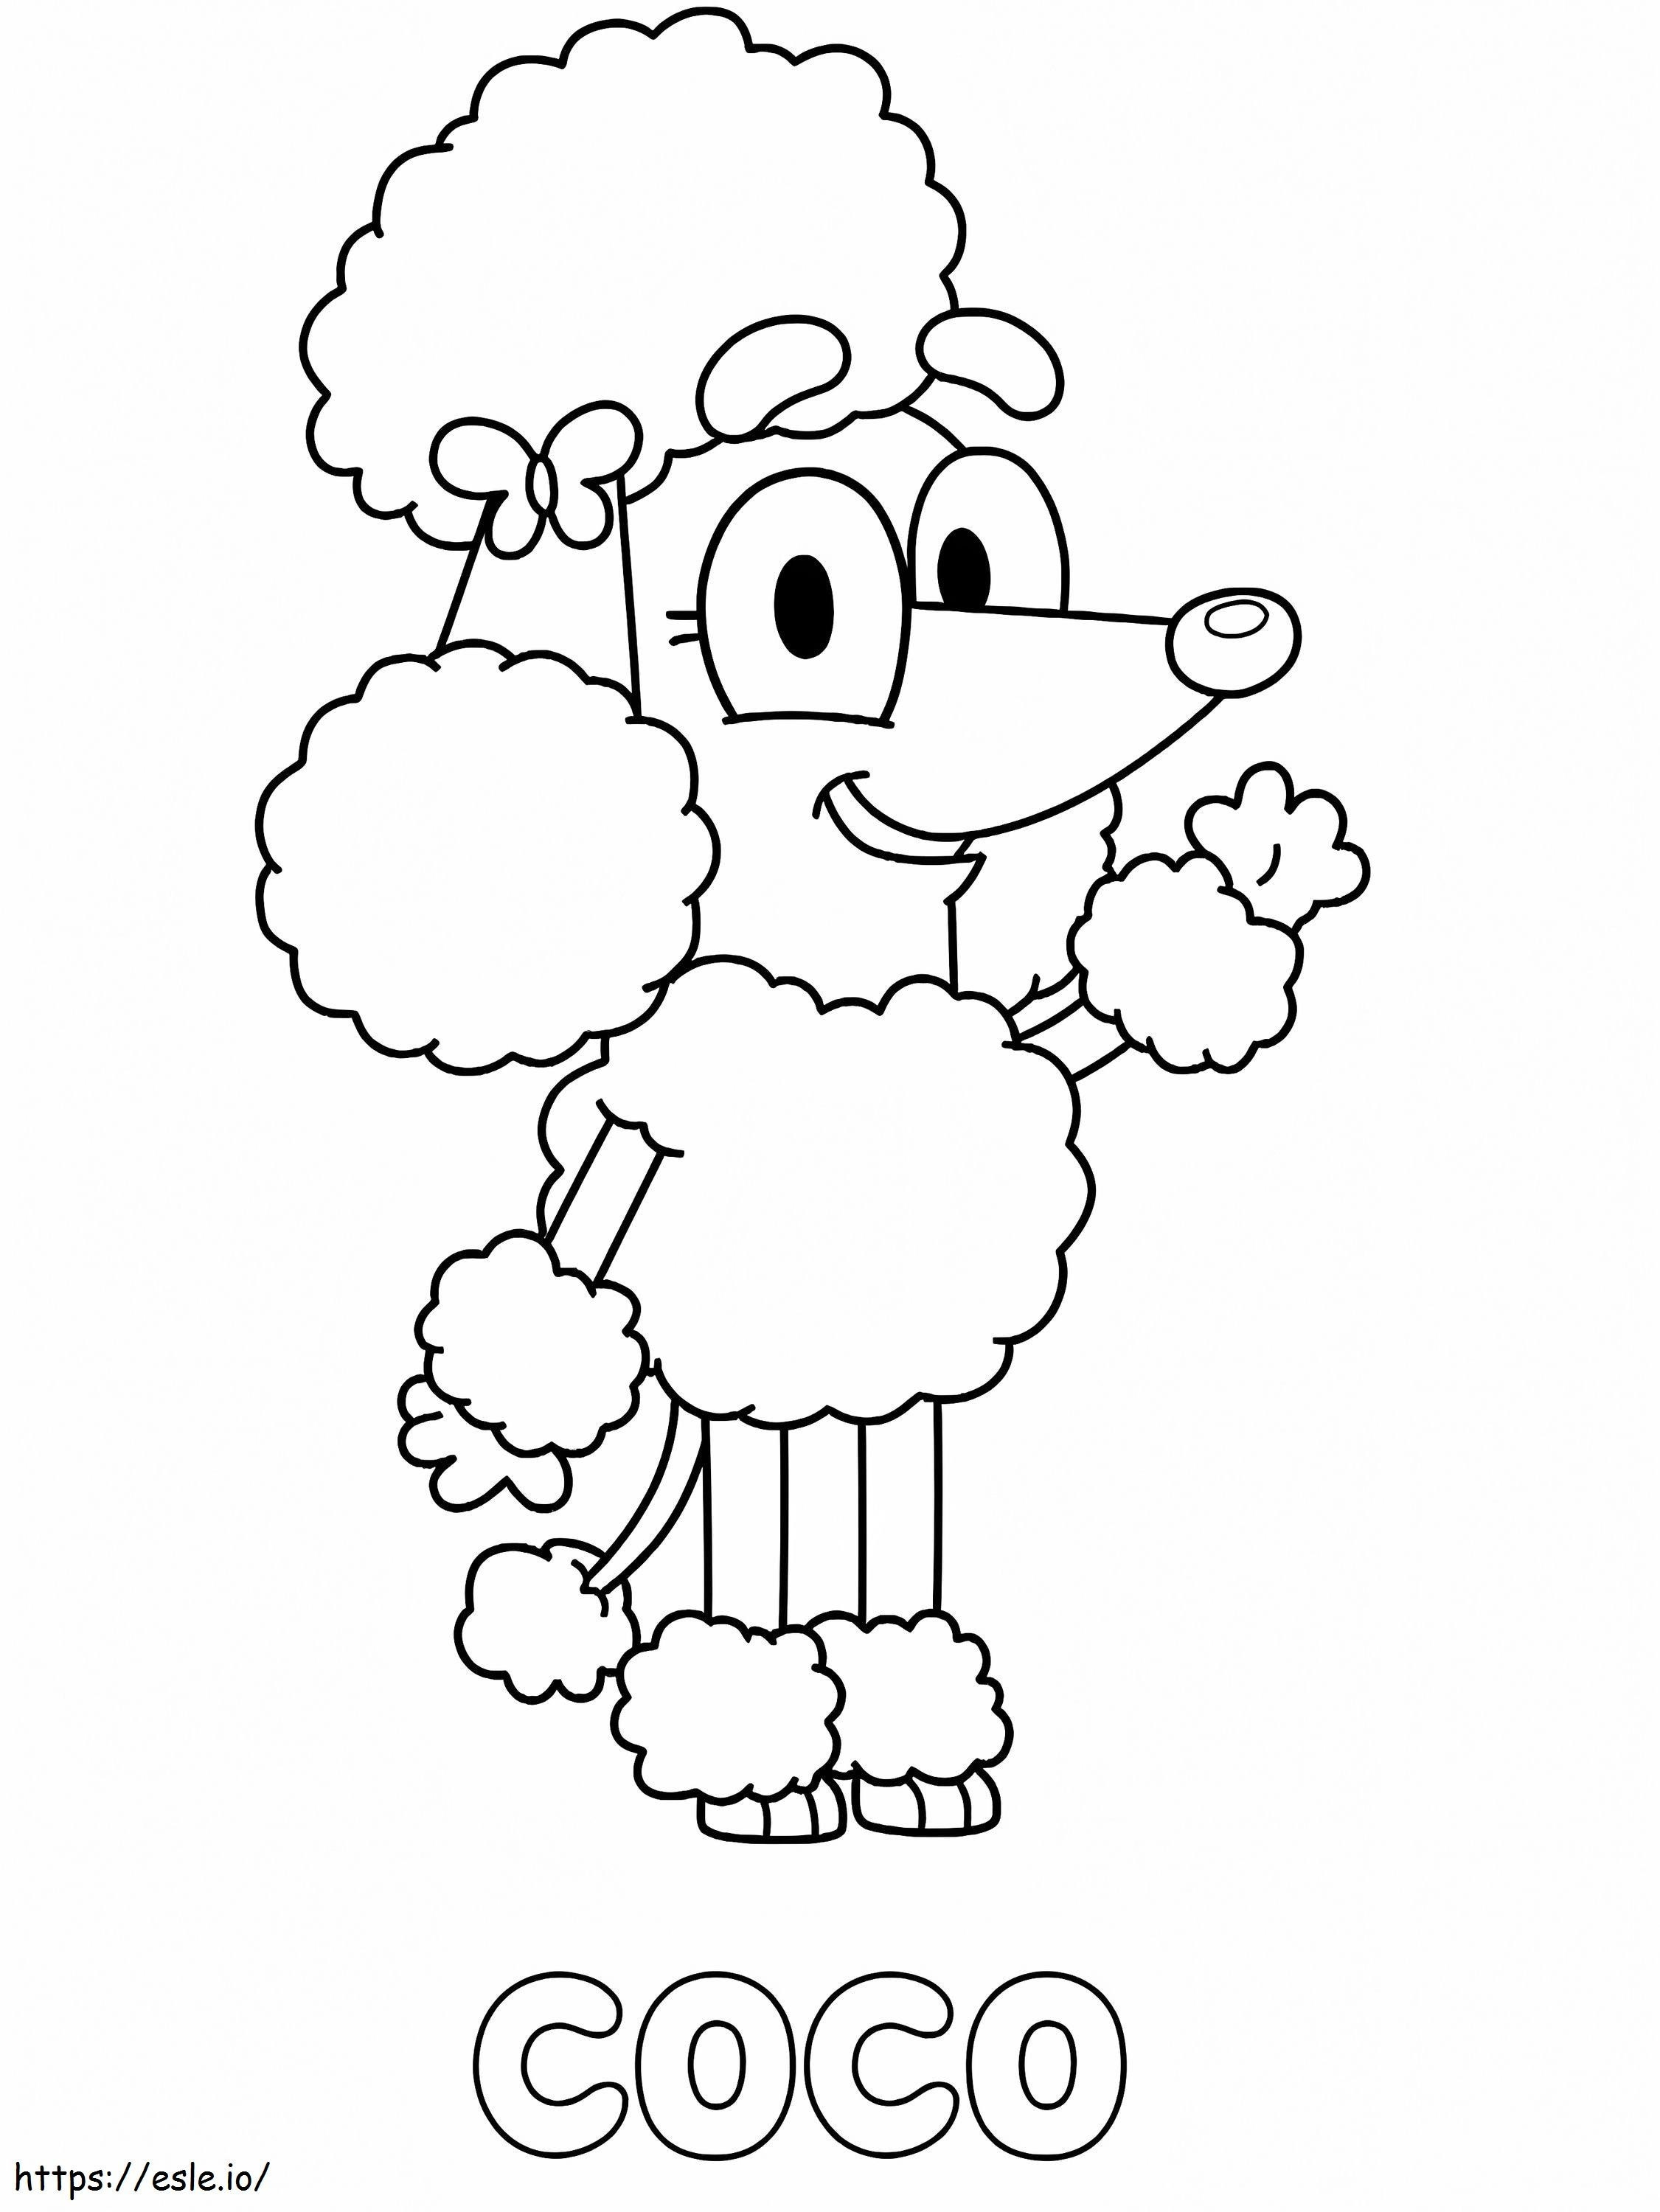 1582826876Poodle Coco coloring page